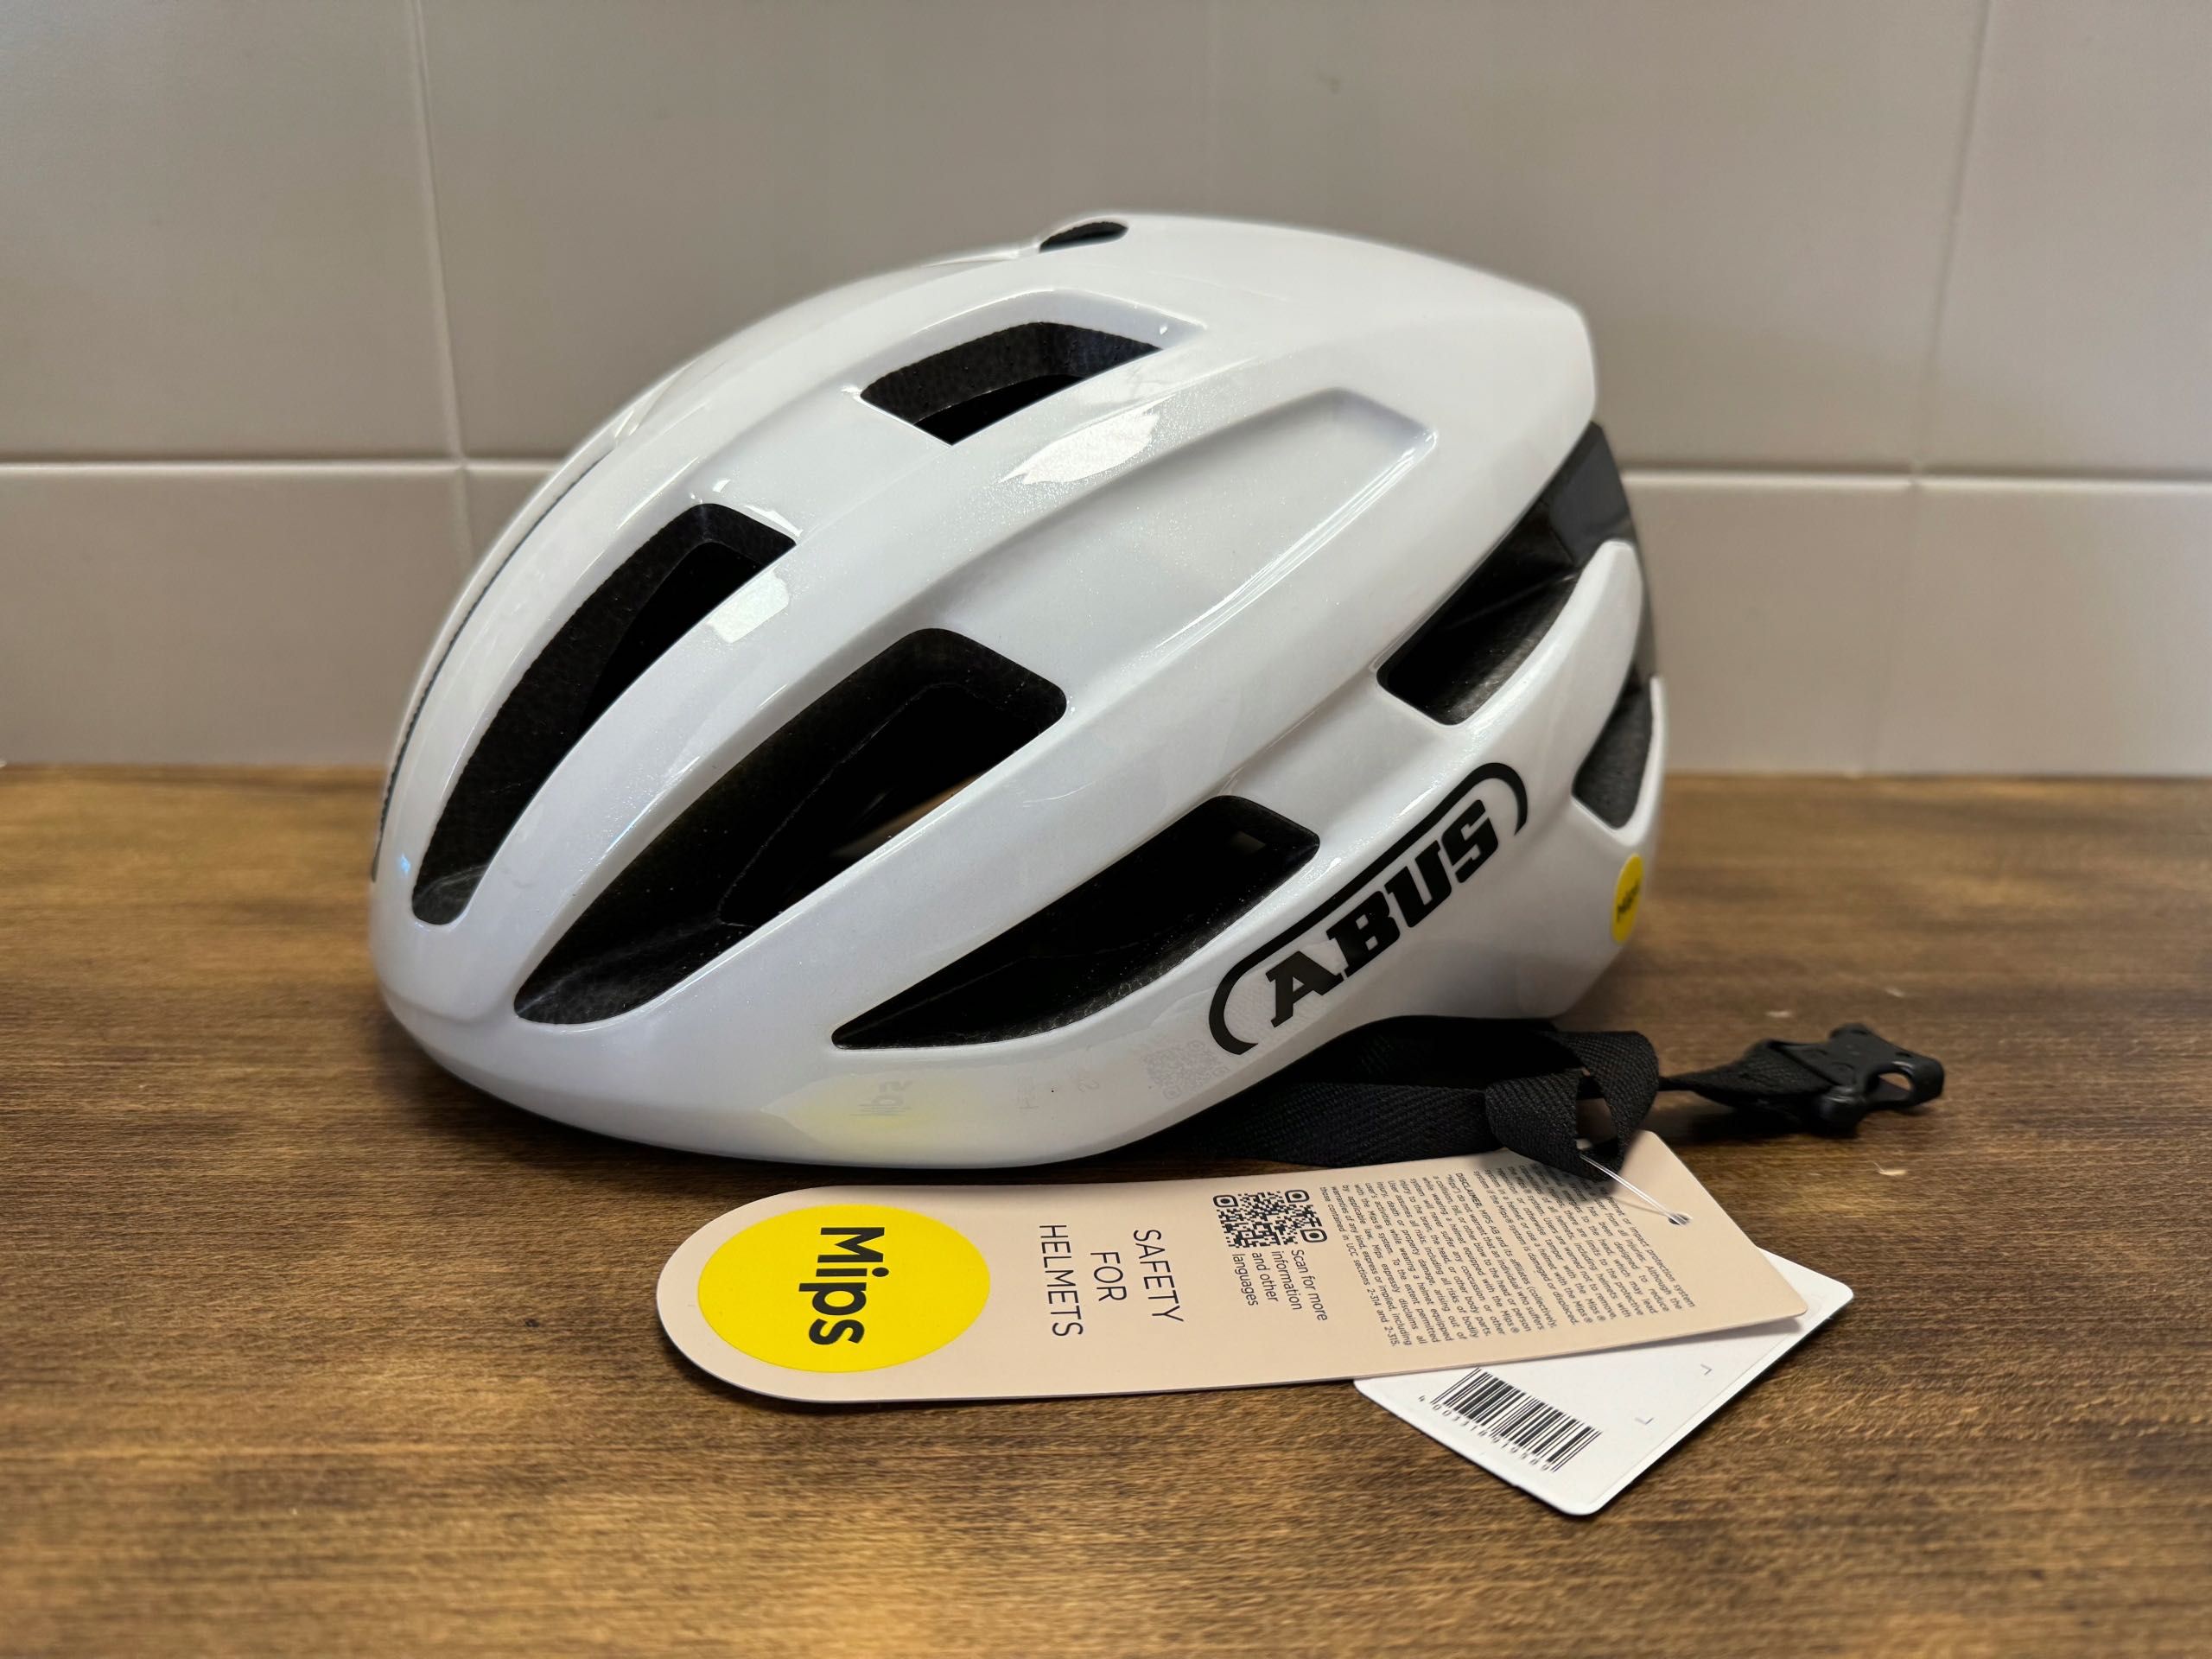 Kask rowerowy Abus 91958 r. S